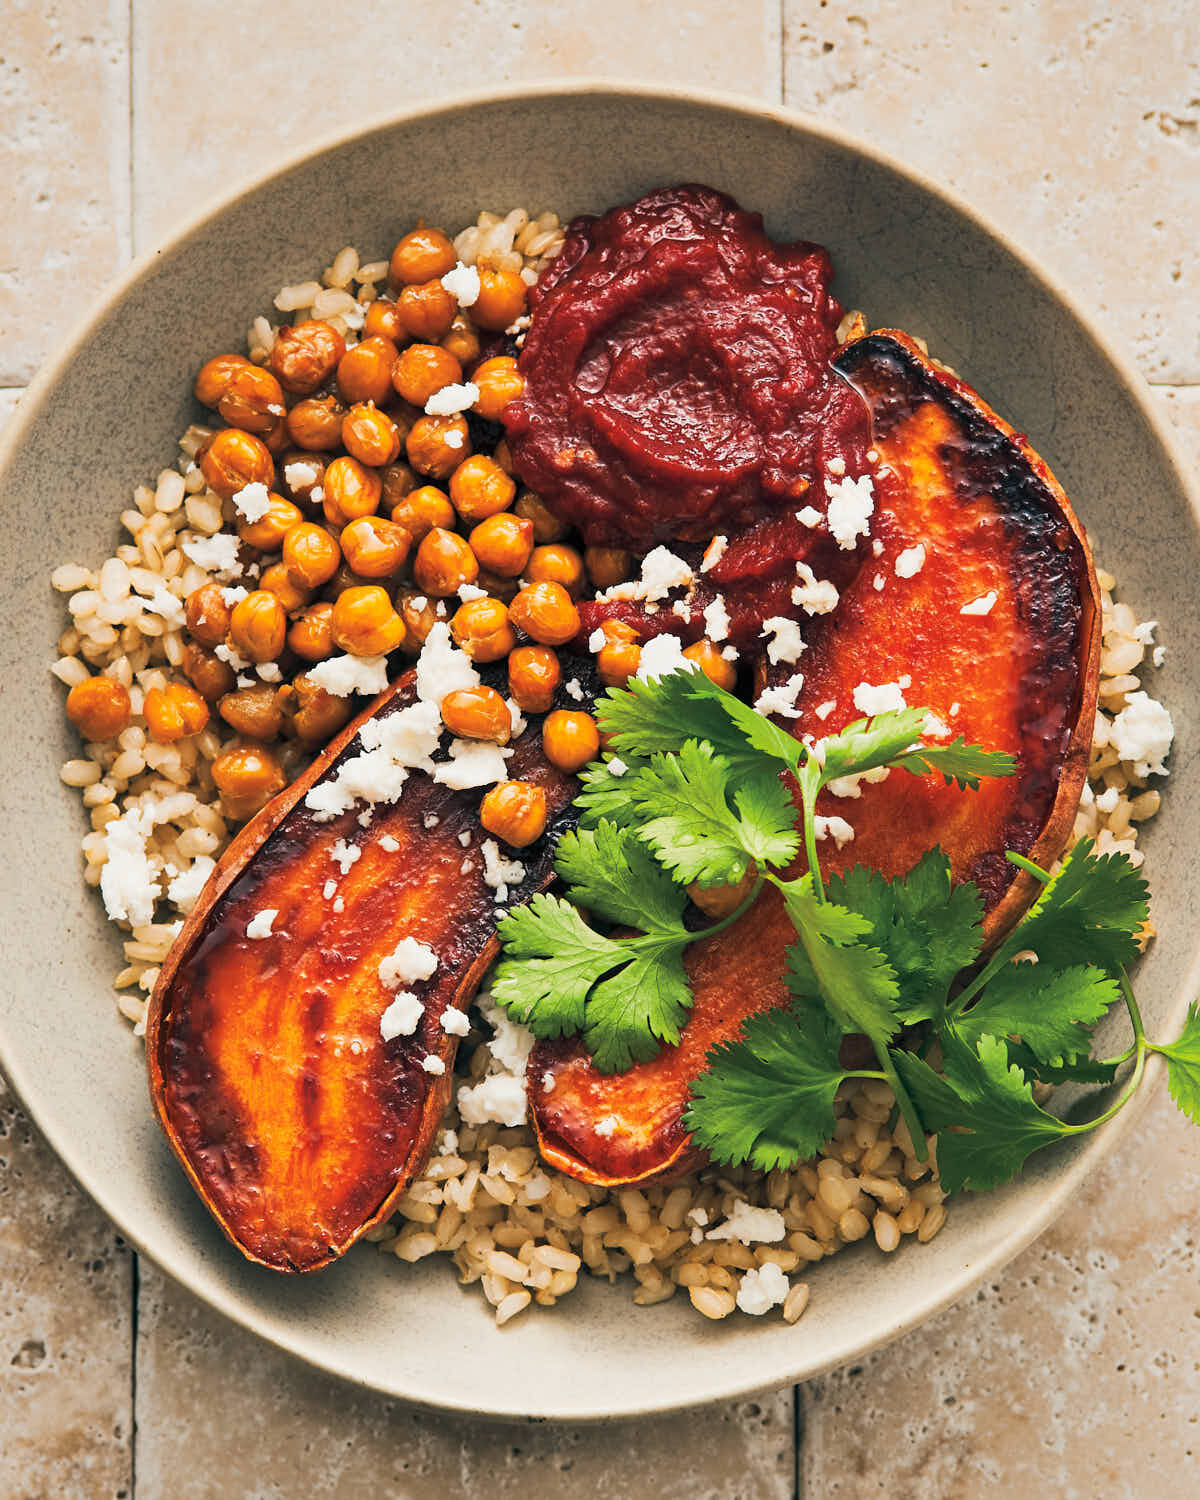 Charred Sweet Potato Bowls from the Evergreen Kitchen cookbook